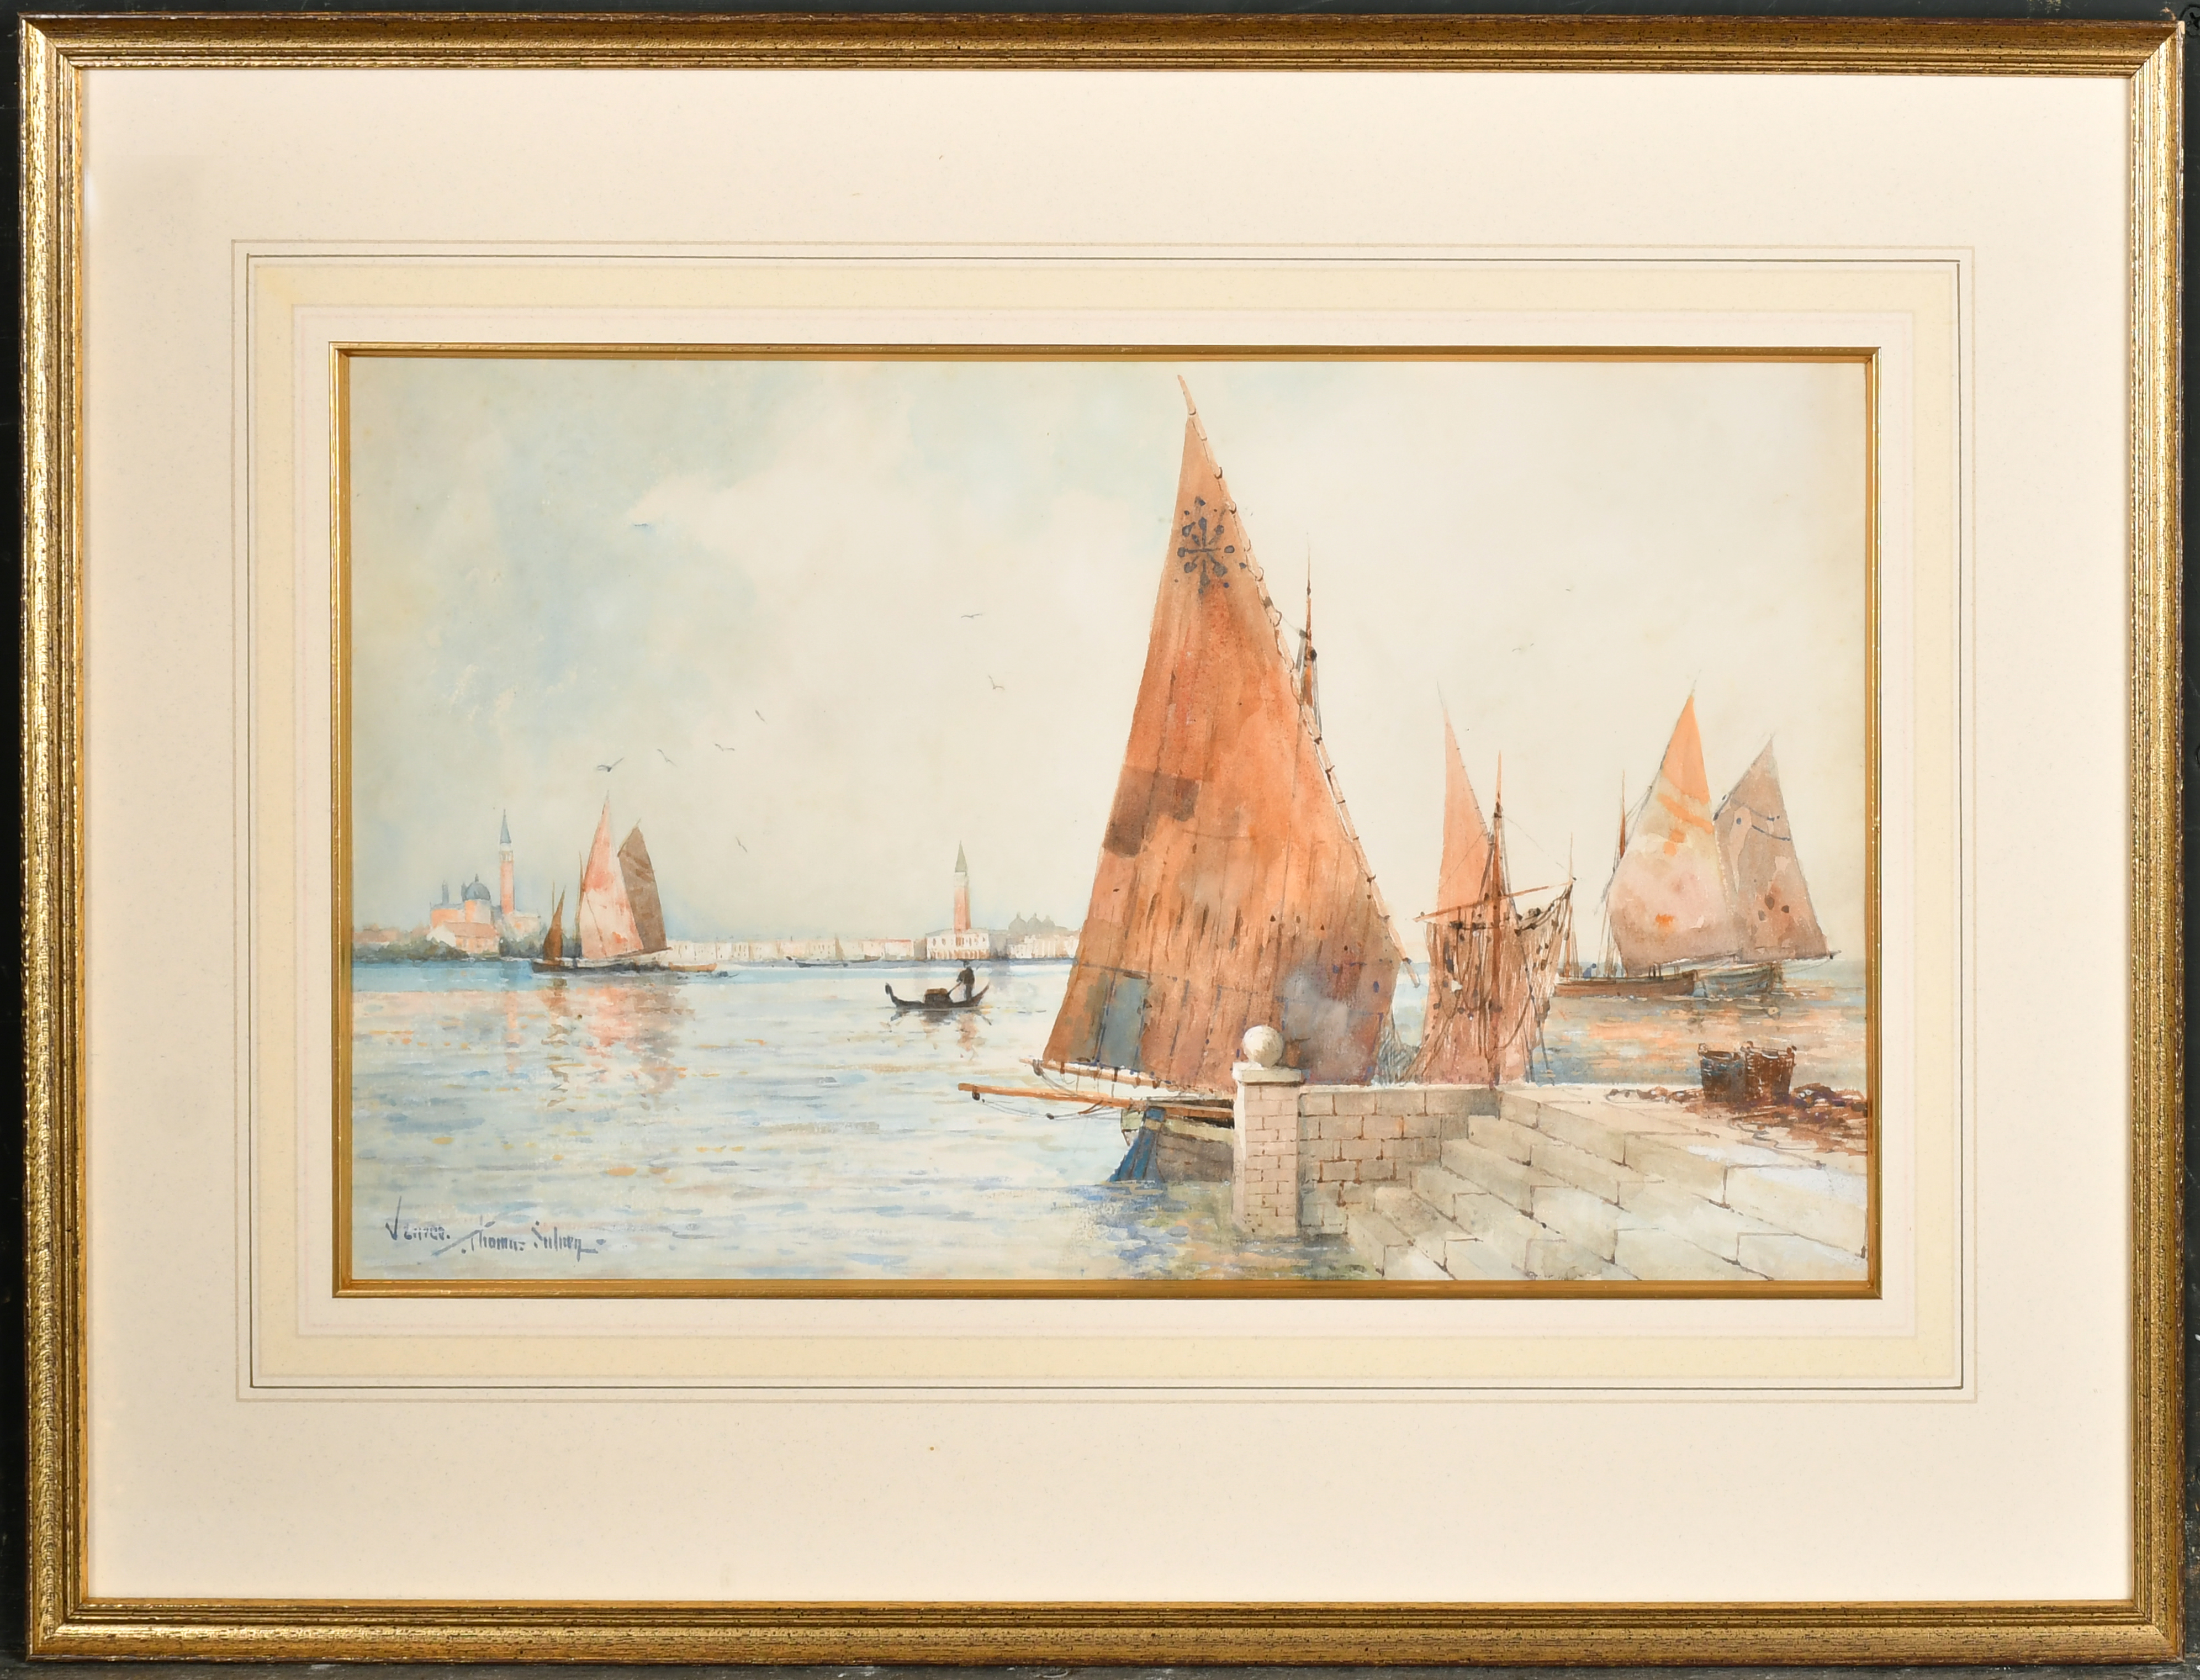 Thomas Sidney (19th-20th Century) British. "Venice", Watercolour, Signed and inscribed, 9.75" x - Image 2 of 5